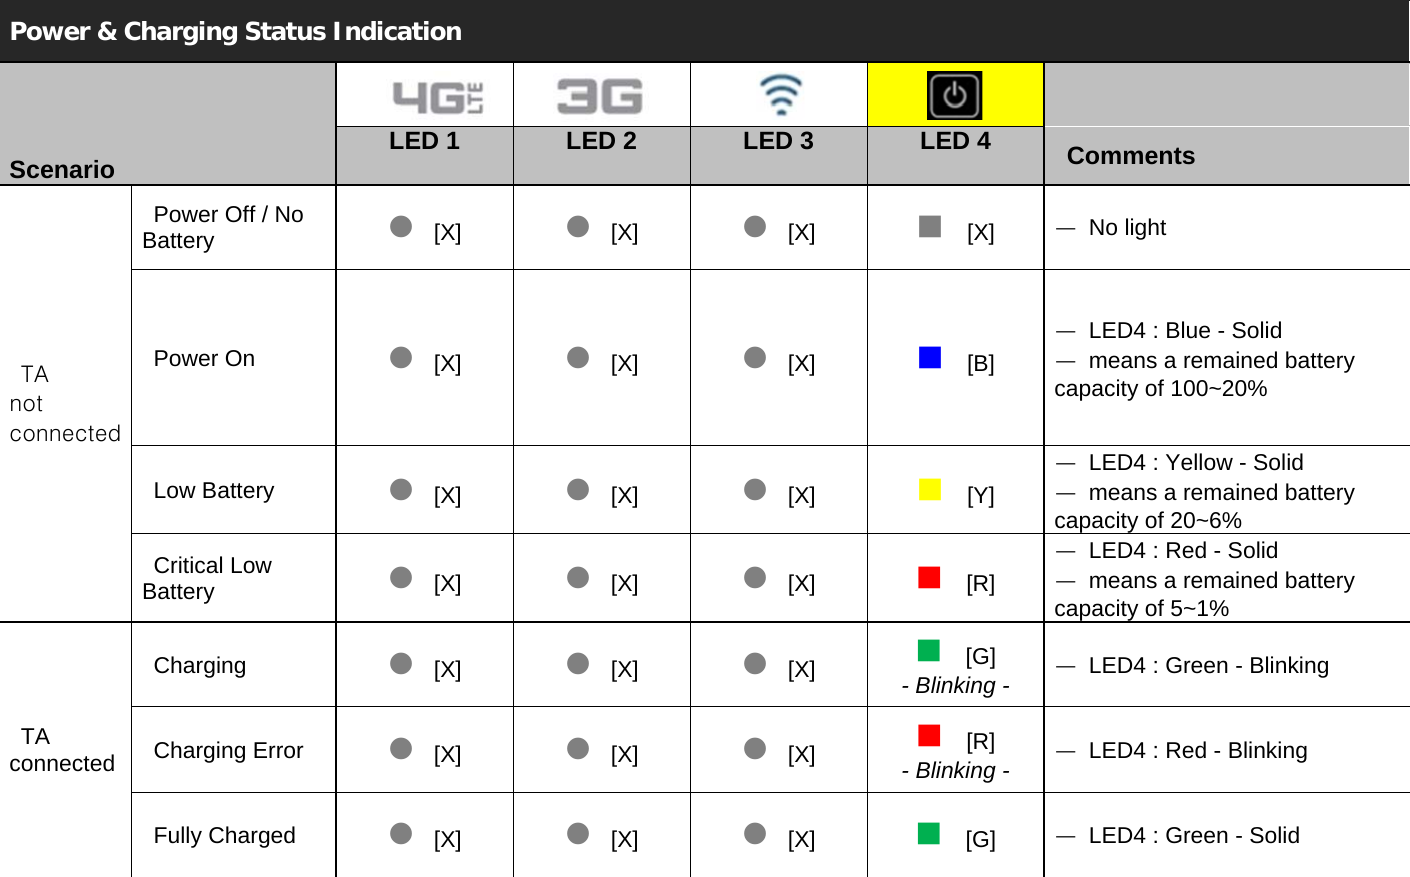 Power &amp; Charging Status Indication         Scenario   LED 1  LED 2  LED 3  LED 4   Comments  TA  not connected  Power Off / No Battery   [X][X][X][X]ㅡ No light   Power On  [X][X][X][B]ㅡ  LED4 : Blue - Solid ㅡ  means a remained battery capacity of 100~20%  Low Battery  [X][X][X][Y]ㅡ  LED4 : Yellow - Solid ㅡ  means a remained battery capacity of 20~6%  Critical Low Battery  [X][X][X][R]ㅡ  LED4 : Red - Solid ㅡ  means a remained battery capacity of 5~1%  TA connected Charging  [X][X][X][G] - Blinking -ㅡ  LED4 : Green - Blinking  Charging Error  [X][X][X][R] - Blinking -ㅡ  LED4 : Red - Blinking  Fully Charged  [X][X][X][G]ㅡ  LED4 : Green - Solid  